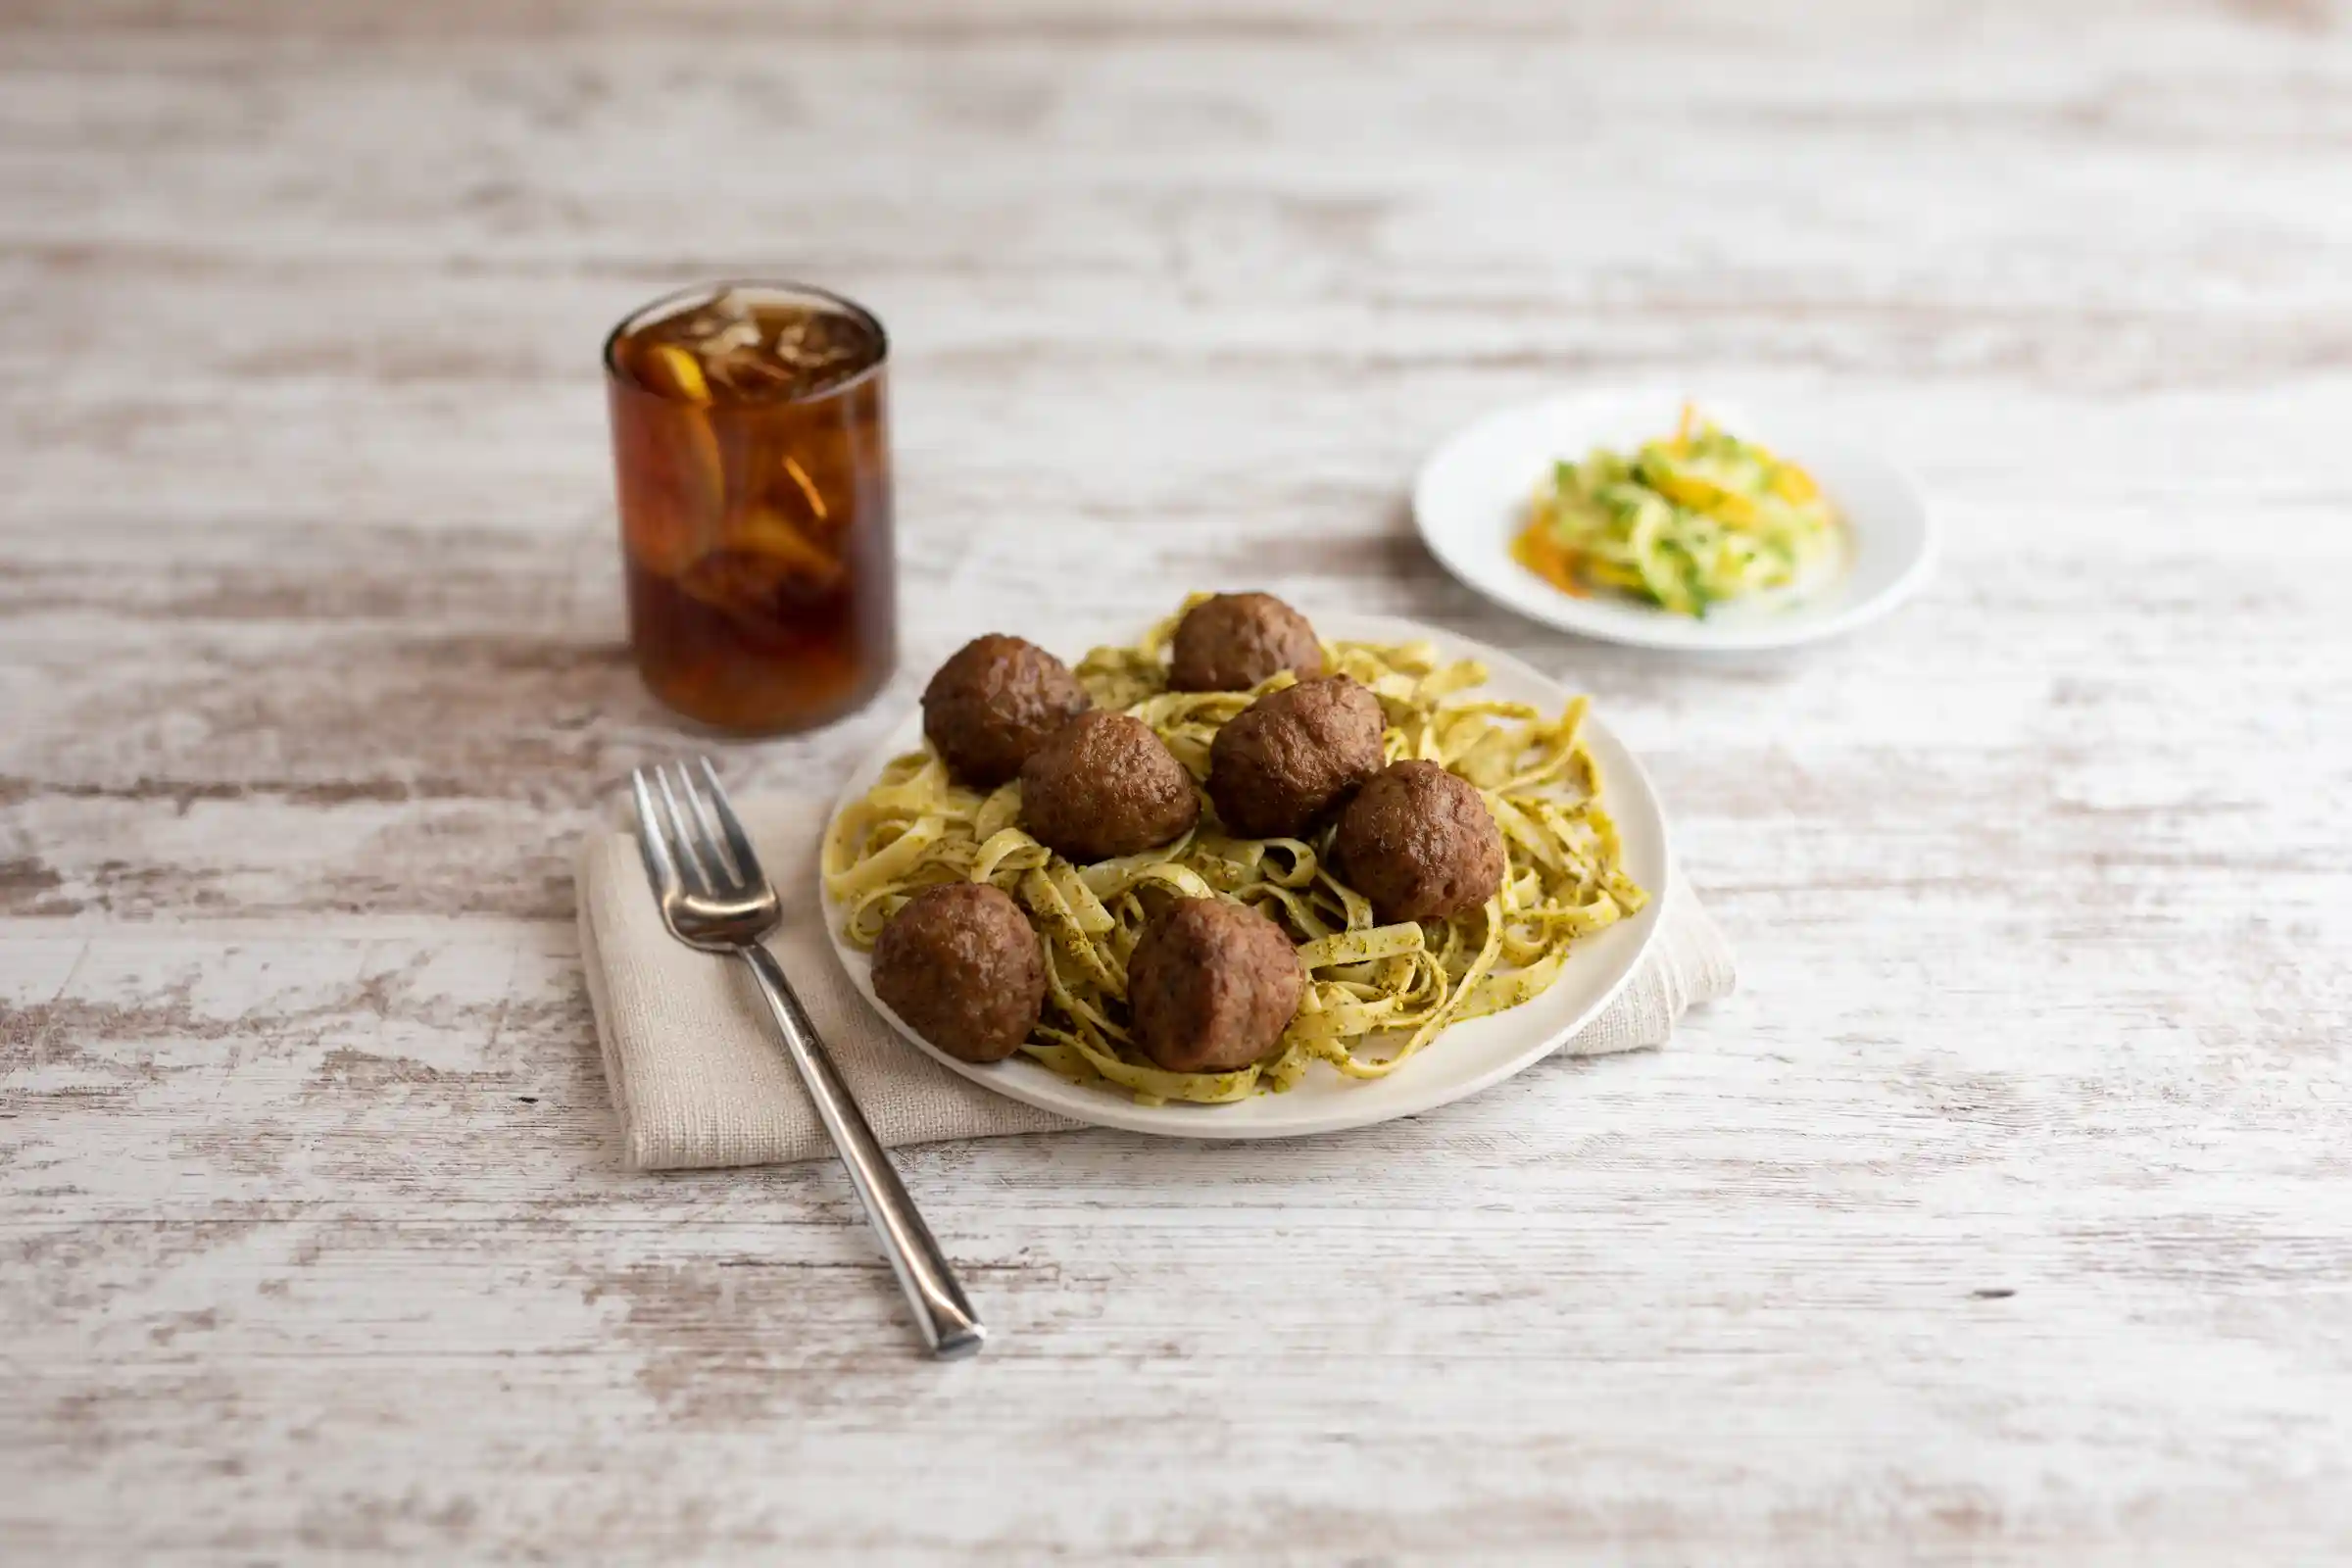 Bonici® Fully Cooked Oven Roasted Italian Style Pork and Beef Meatballs, .5 ozhttps://images.salsify.com/image/upload/s--gYWnRYdy--/q_25/gdb5vbtmqsioscqynqow.webp